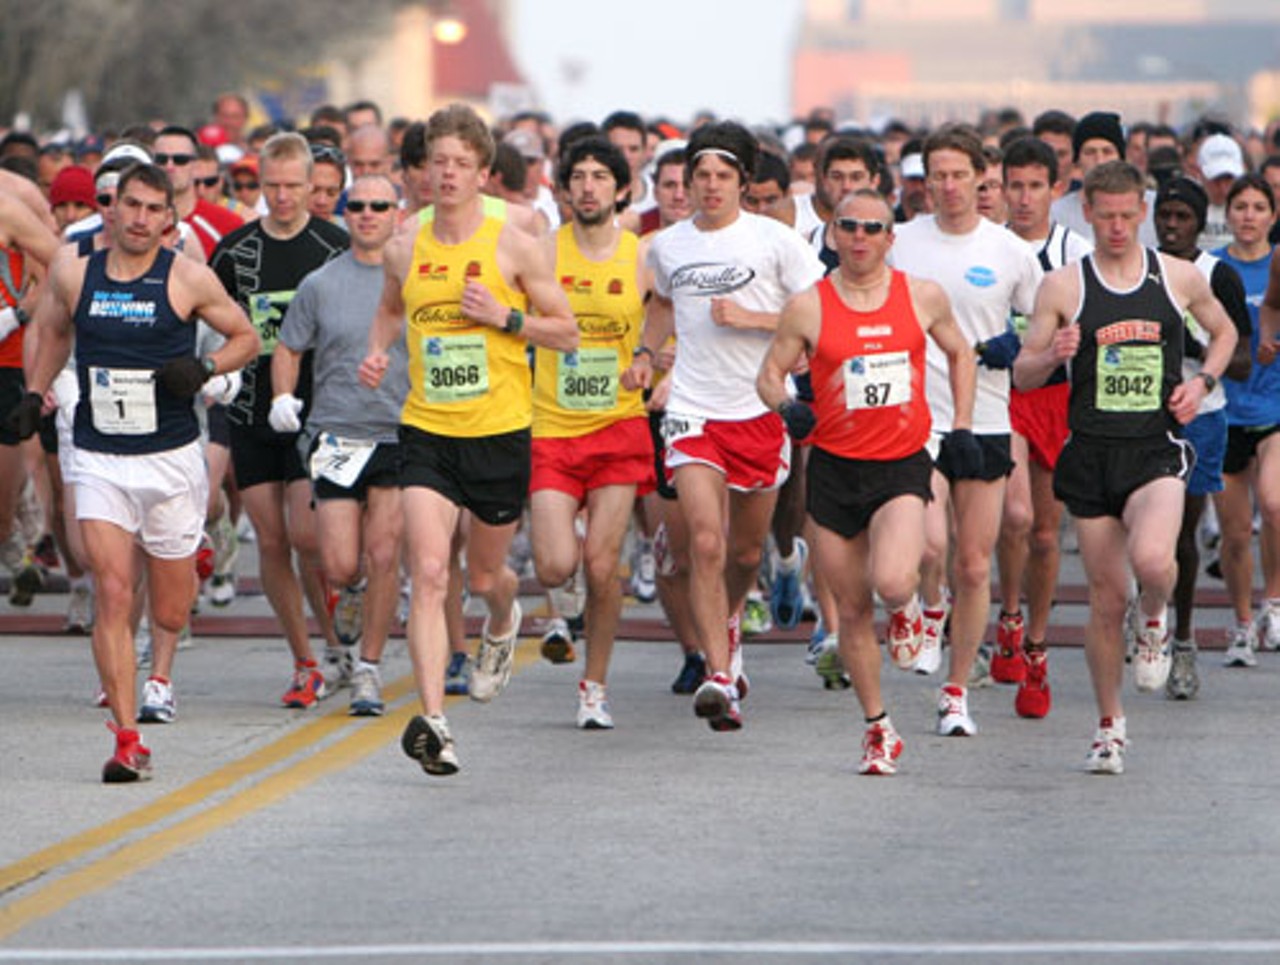 Nearly 15,000 runners participated in the 2008 Go! St. Louis Marathon. Shown are the runners sprinting off the starting line.